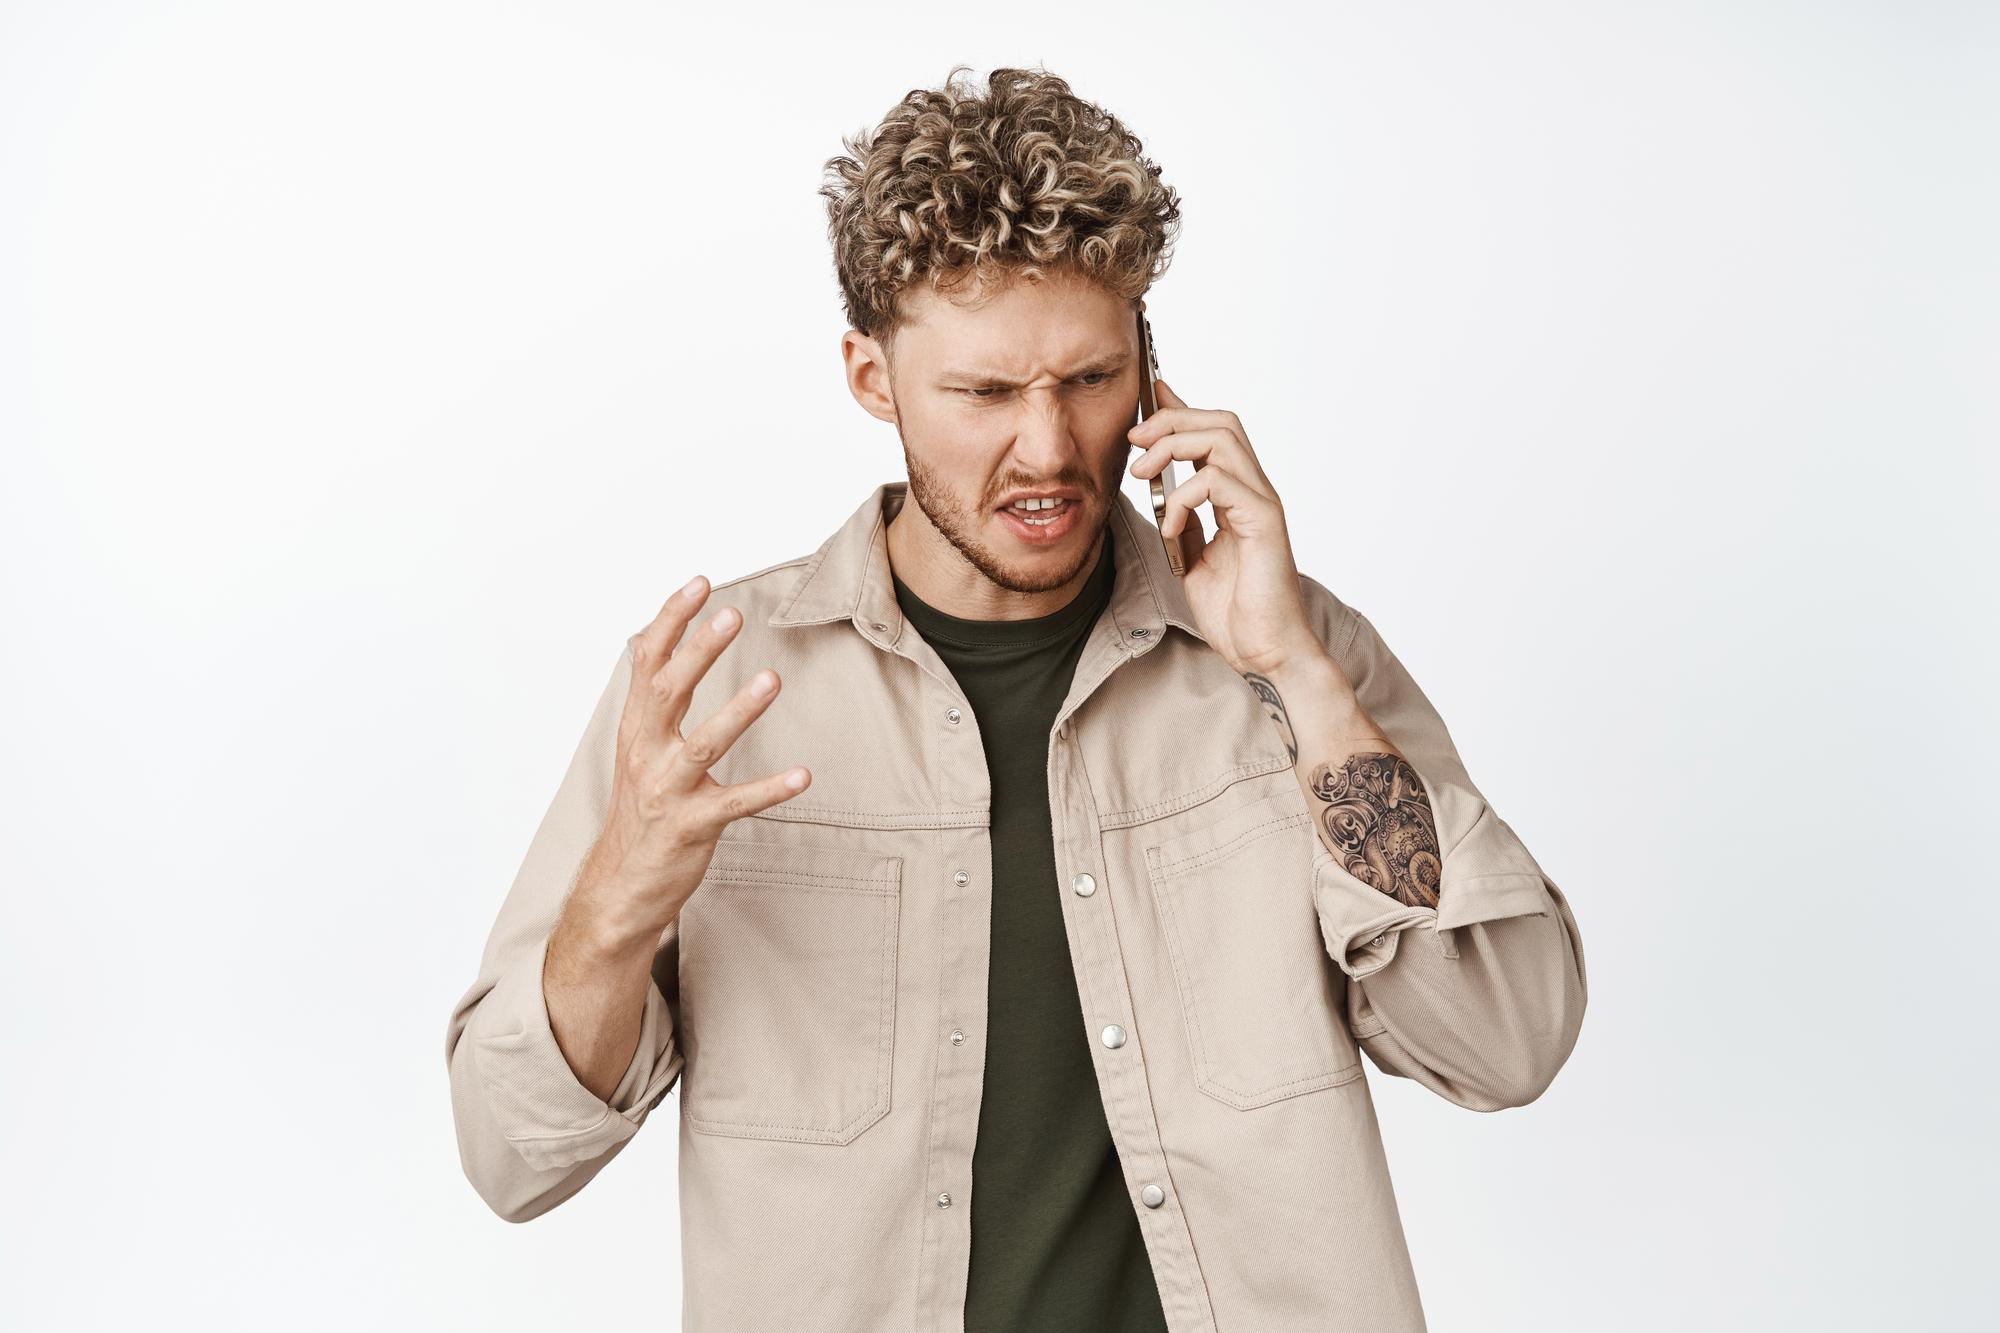 An angry man talking on the phone | Source: Freepik